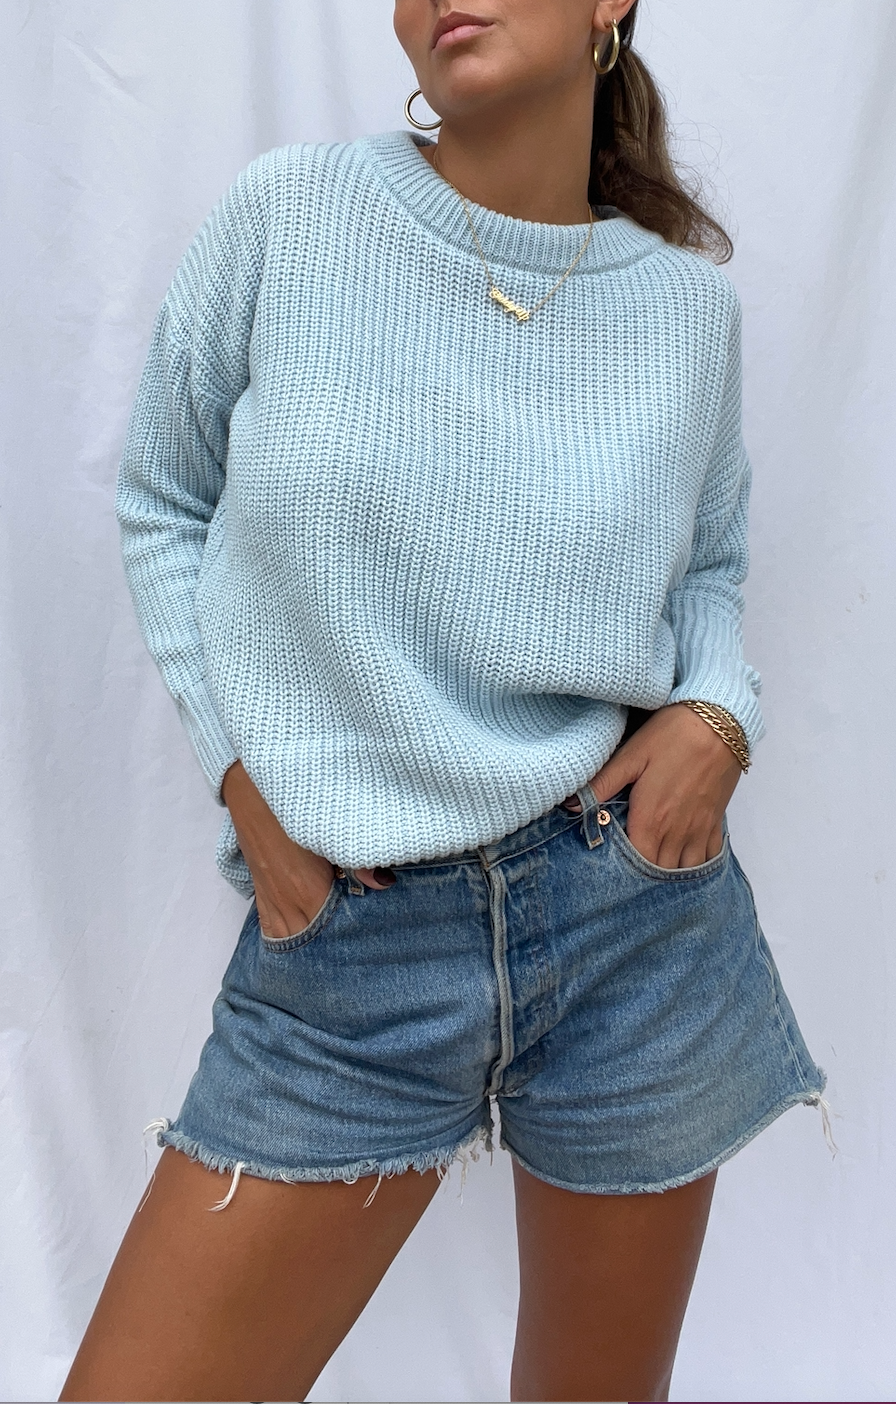 Baby Blue Knit Sweater